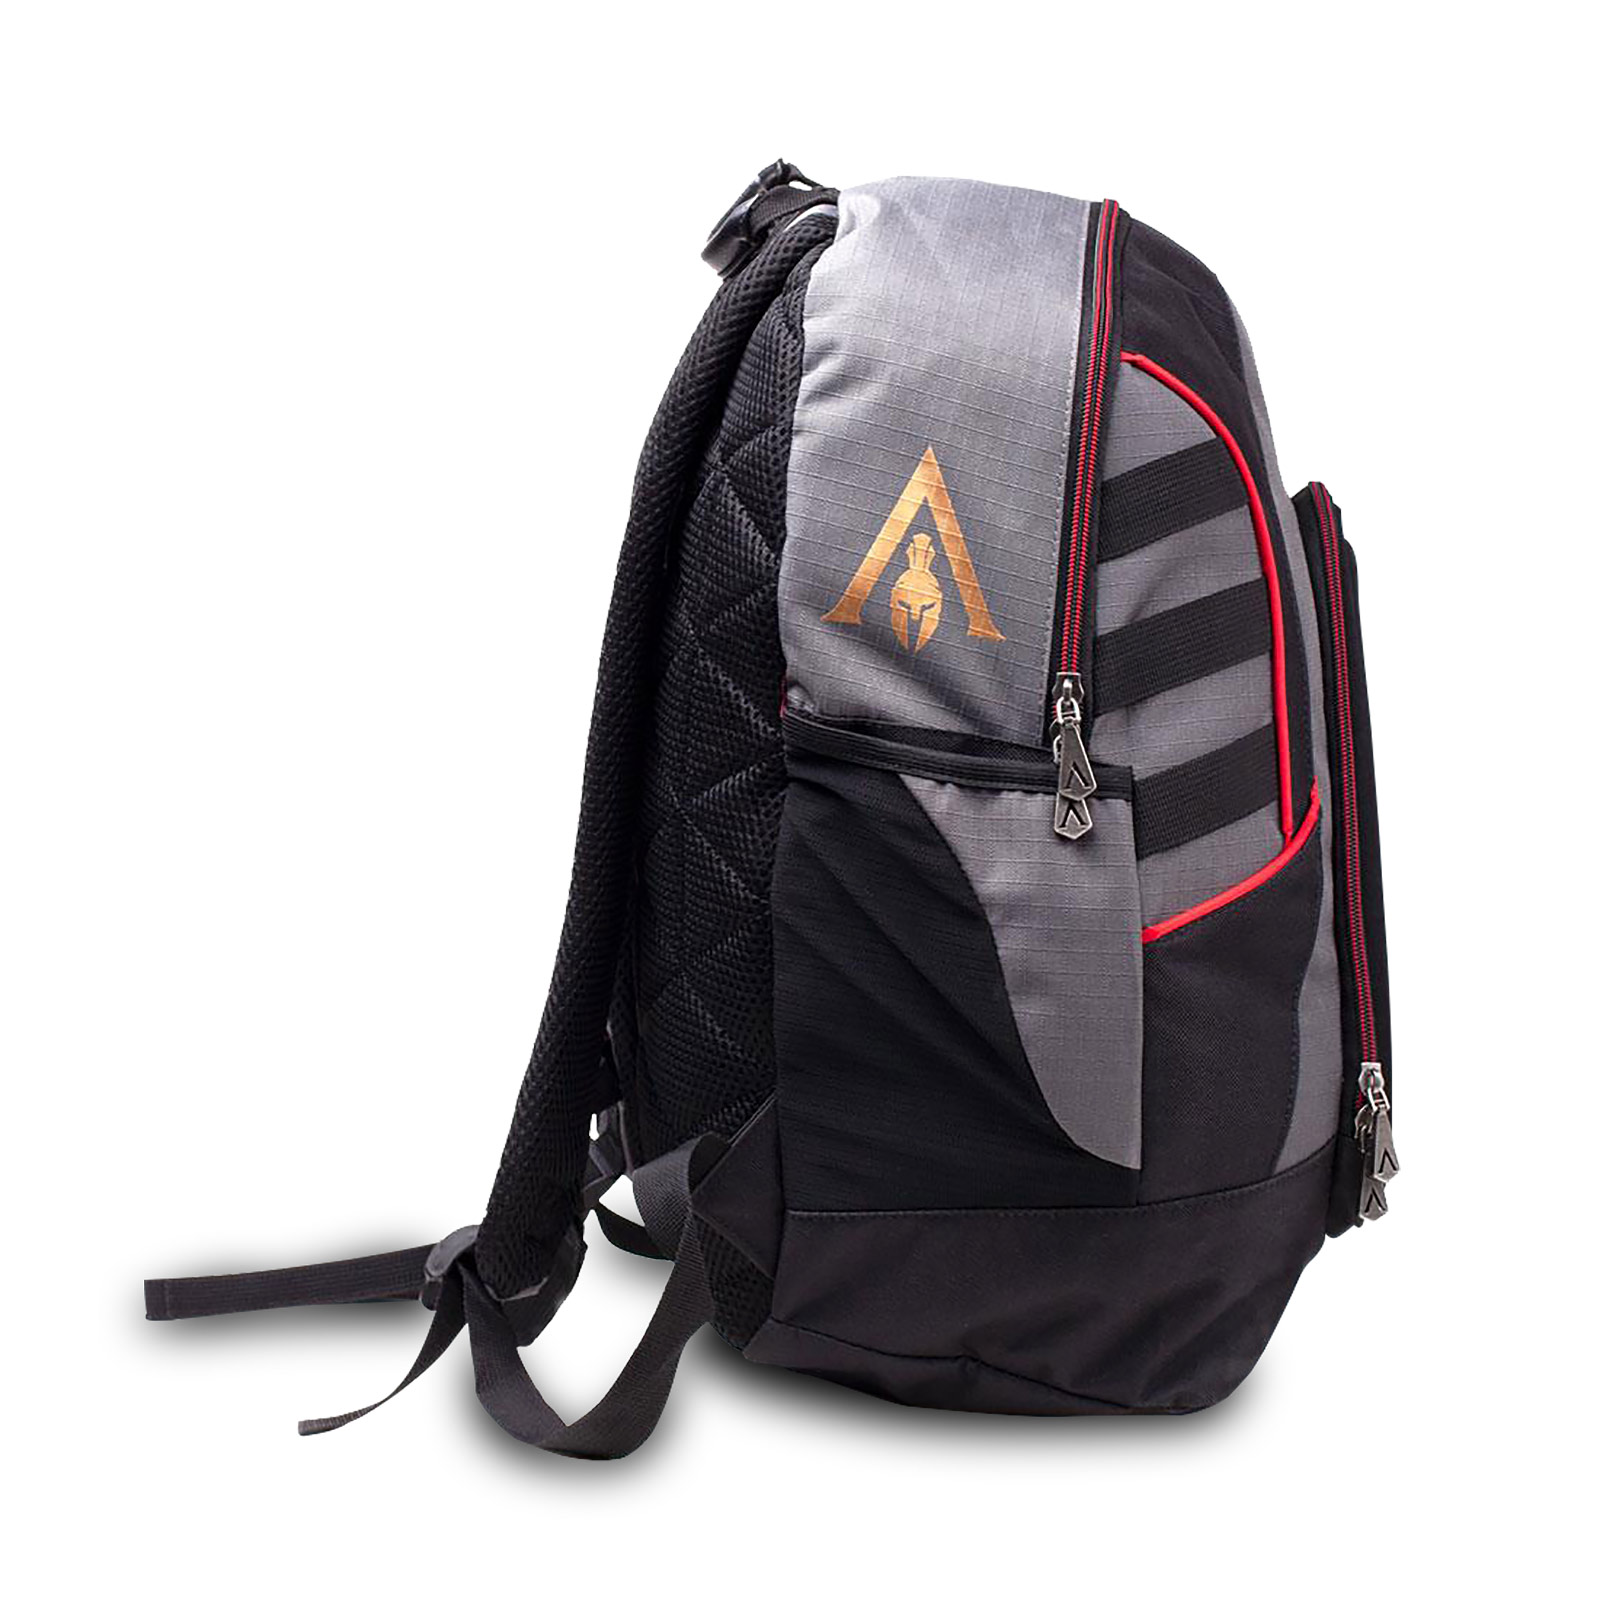 Assassin's Creed - Odyssey Backpack Black